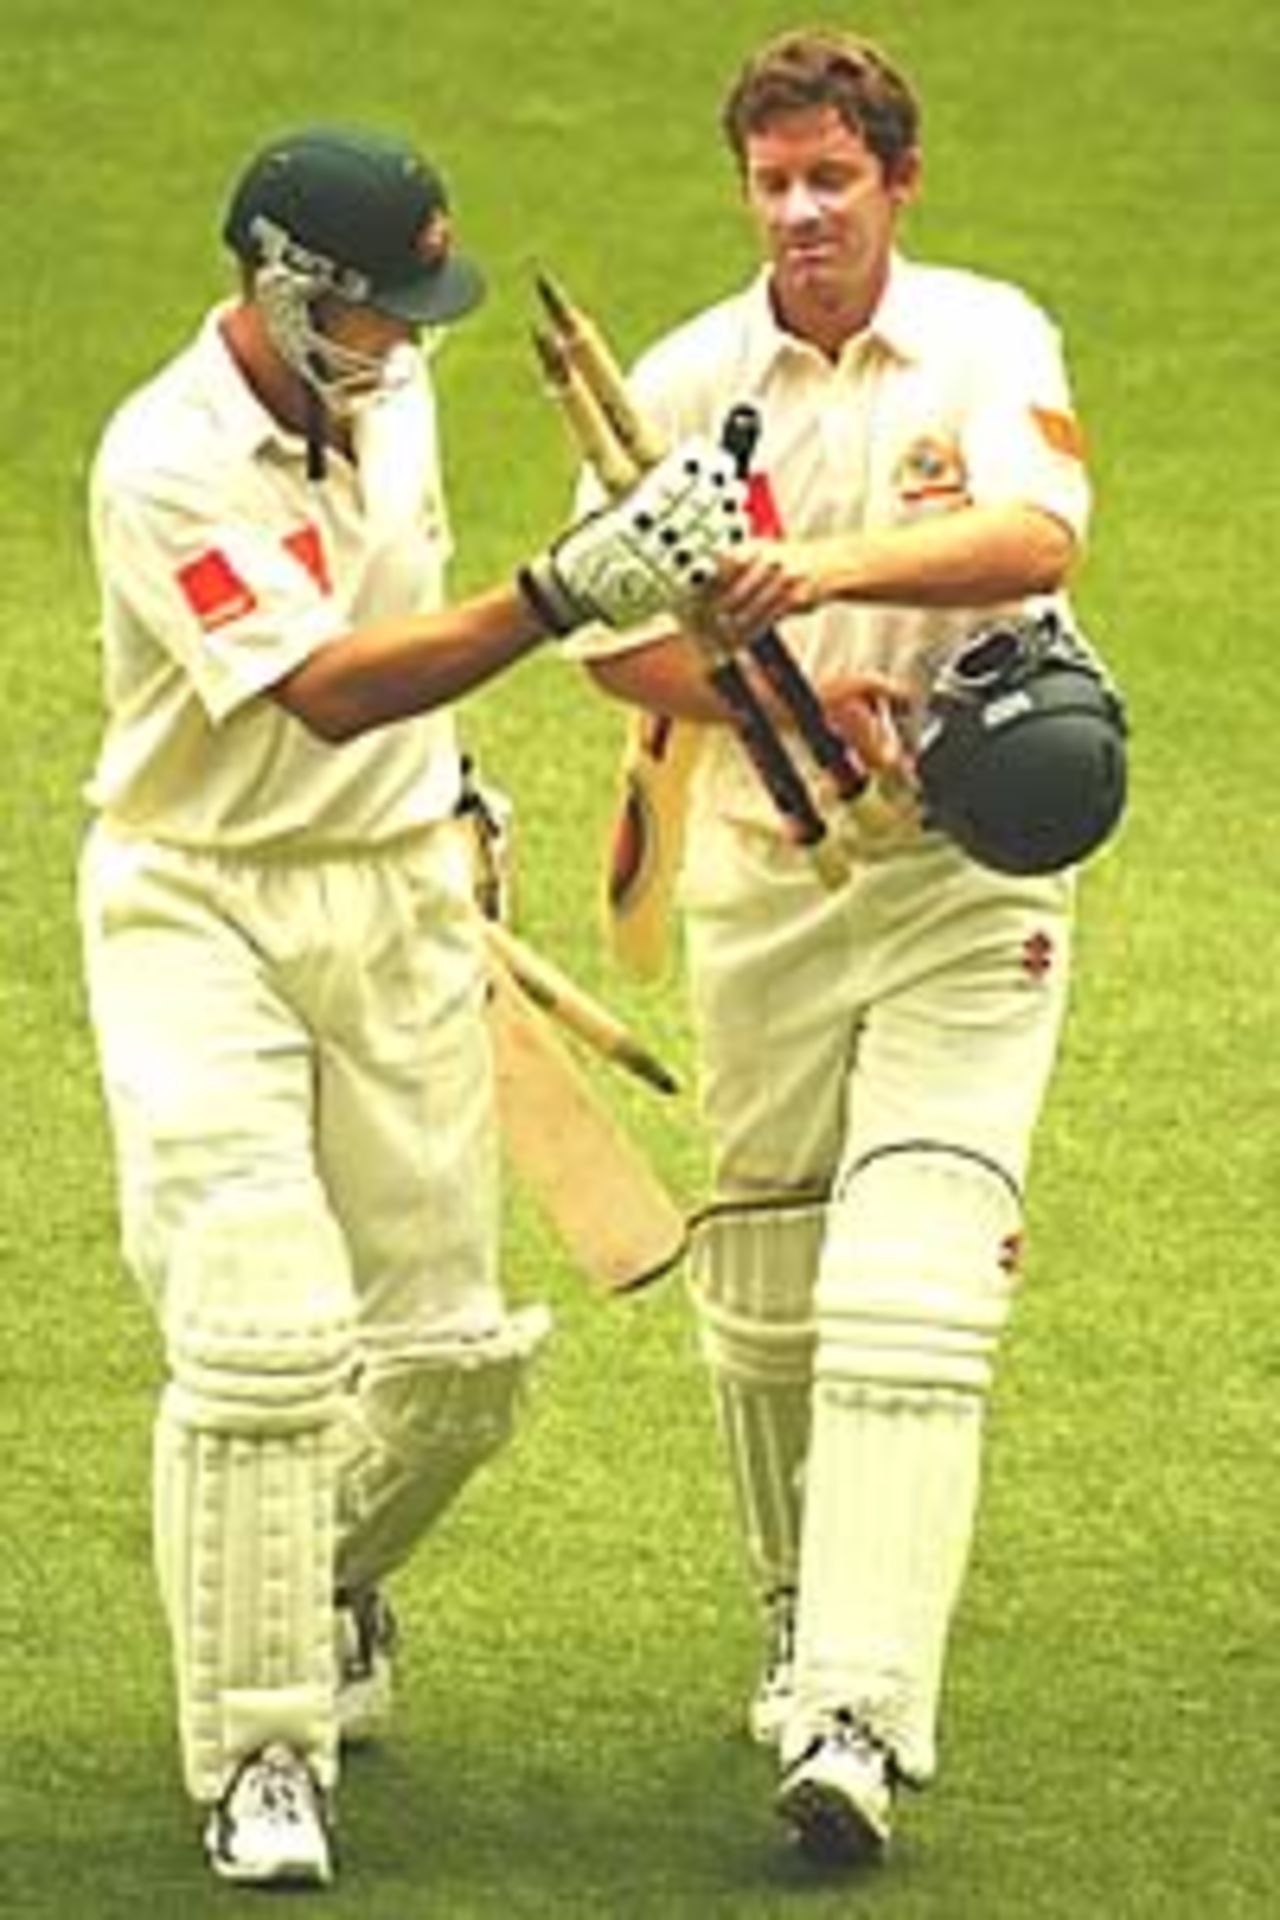 MELBOURNE - DECEMBER 30: Adam Gilchrist and Martin Love of Australia leave the field with stumps in hand after winning the fifth day of the Fourth Ashes Test between Australia and England at the Melbourne Cricket Ground in Melbourne, Australia on December 30, 2002.